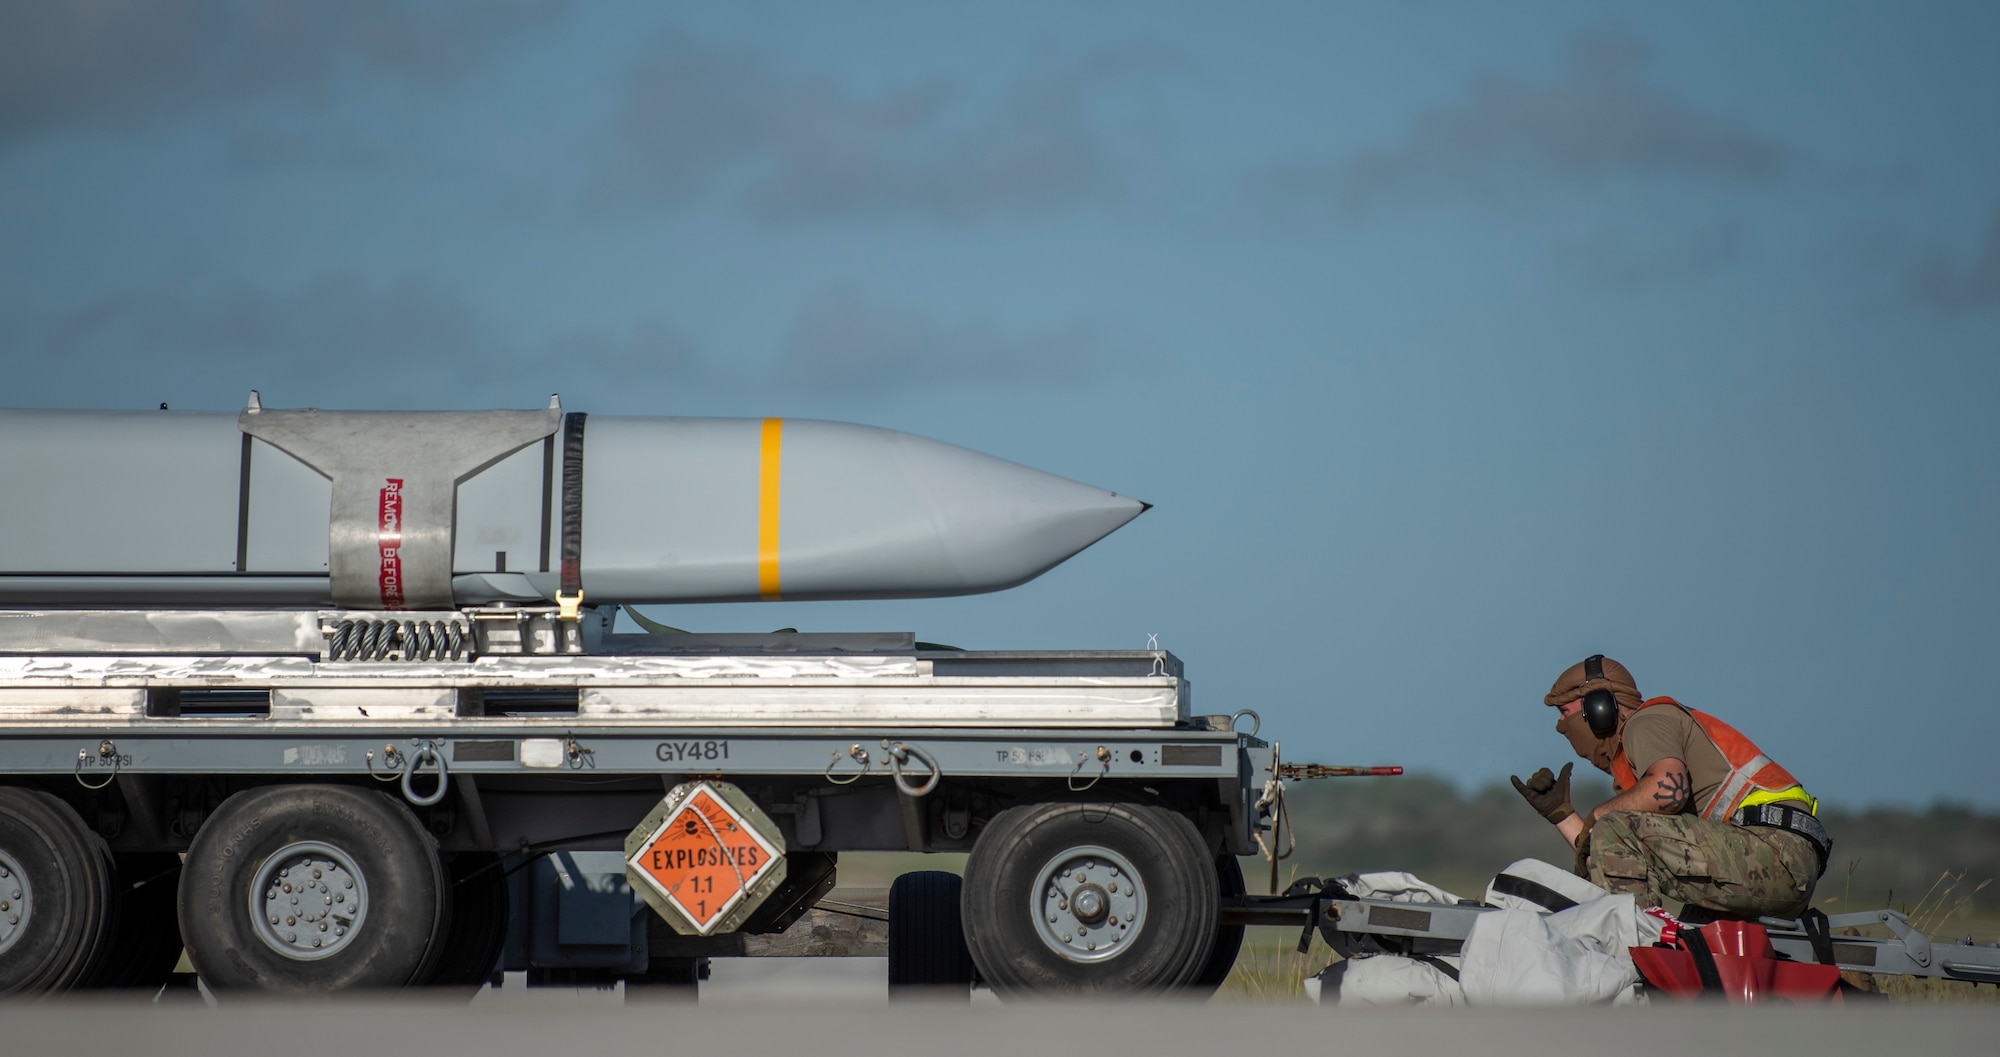 Staff Sgt. Zakk Bunting, 9th Expeditionary Bomb Squadron Aircraft Maintenance Unit  weapons load crew member, prepares to load a joint air-to-surface standoff missile into a B-1B Lancer on the flightline at Anderson Air Force Base, Guam, May 9, 2020. The B-1B can carry more than 74,000 lbs of munitions, which is the largest payload in the Air Force inventory. (U.S. Air Force photo by Senior Airman River Bruce)